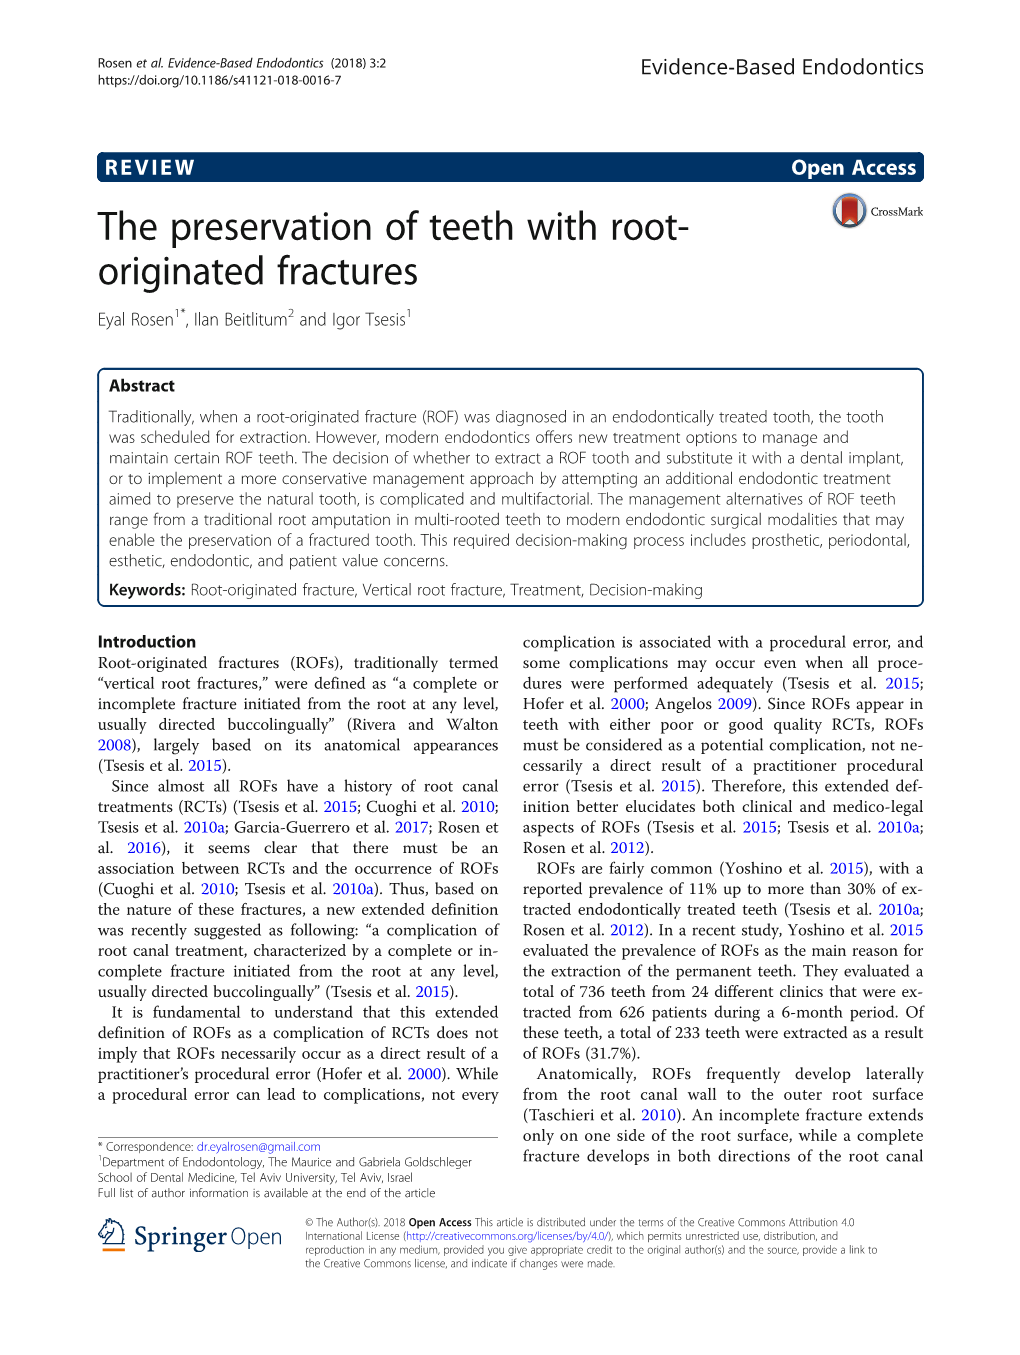 The Preservation of Teeth with Root-Originated Fractures